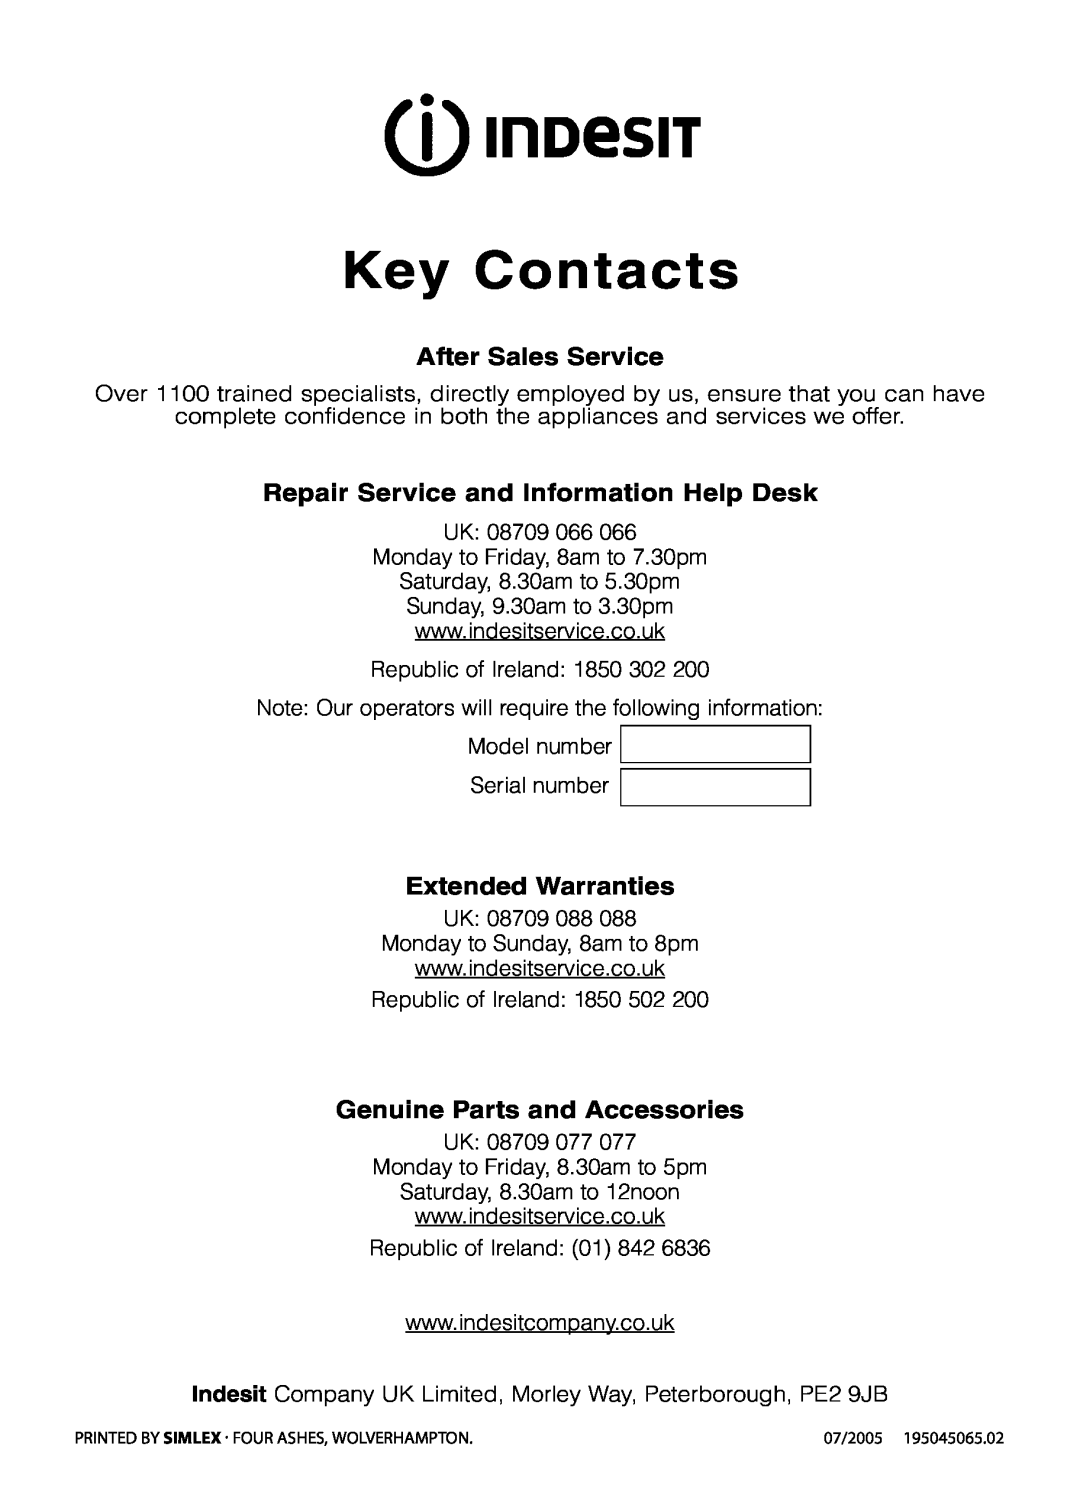 Indesit KD641G, KD643G Key Contacts, After Sales Service, Repair Service and Information Help Desk, Extended Warranties 